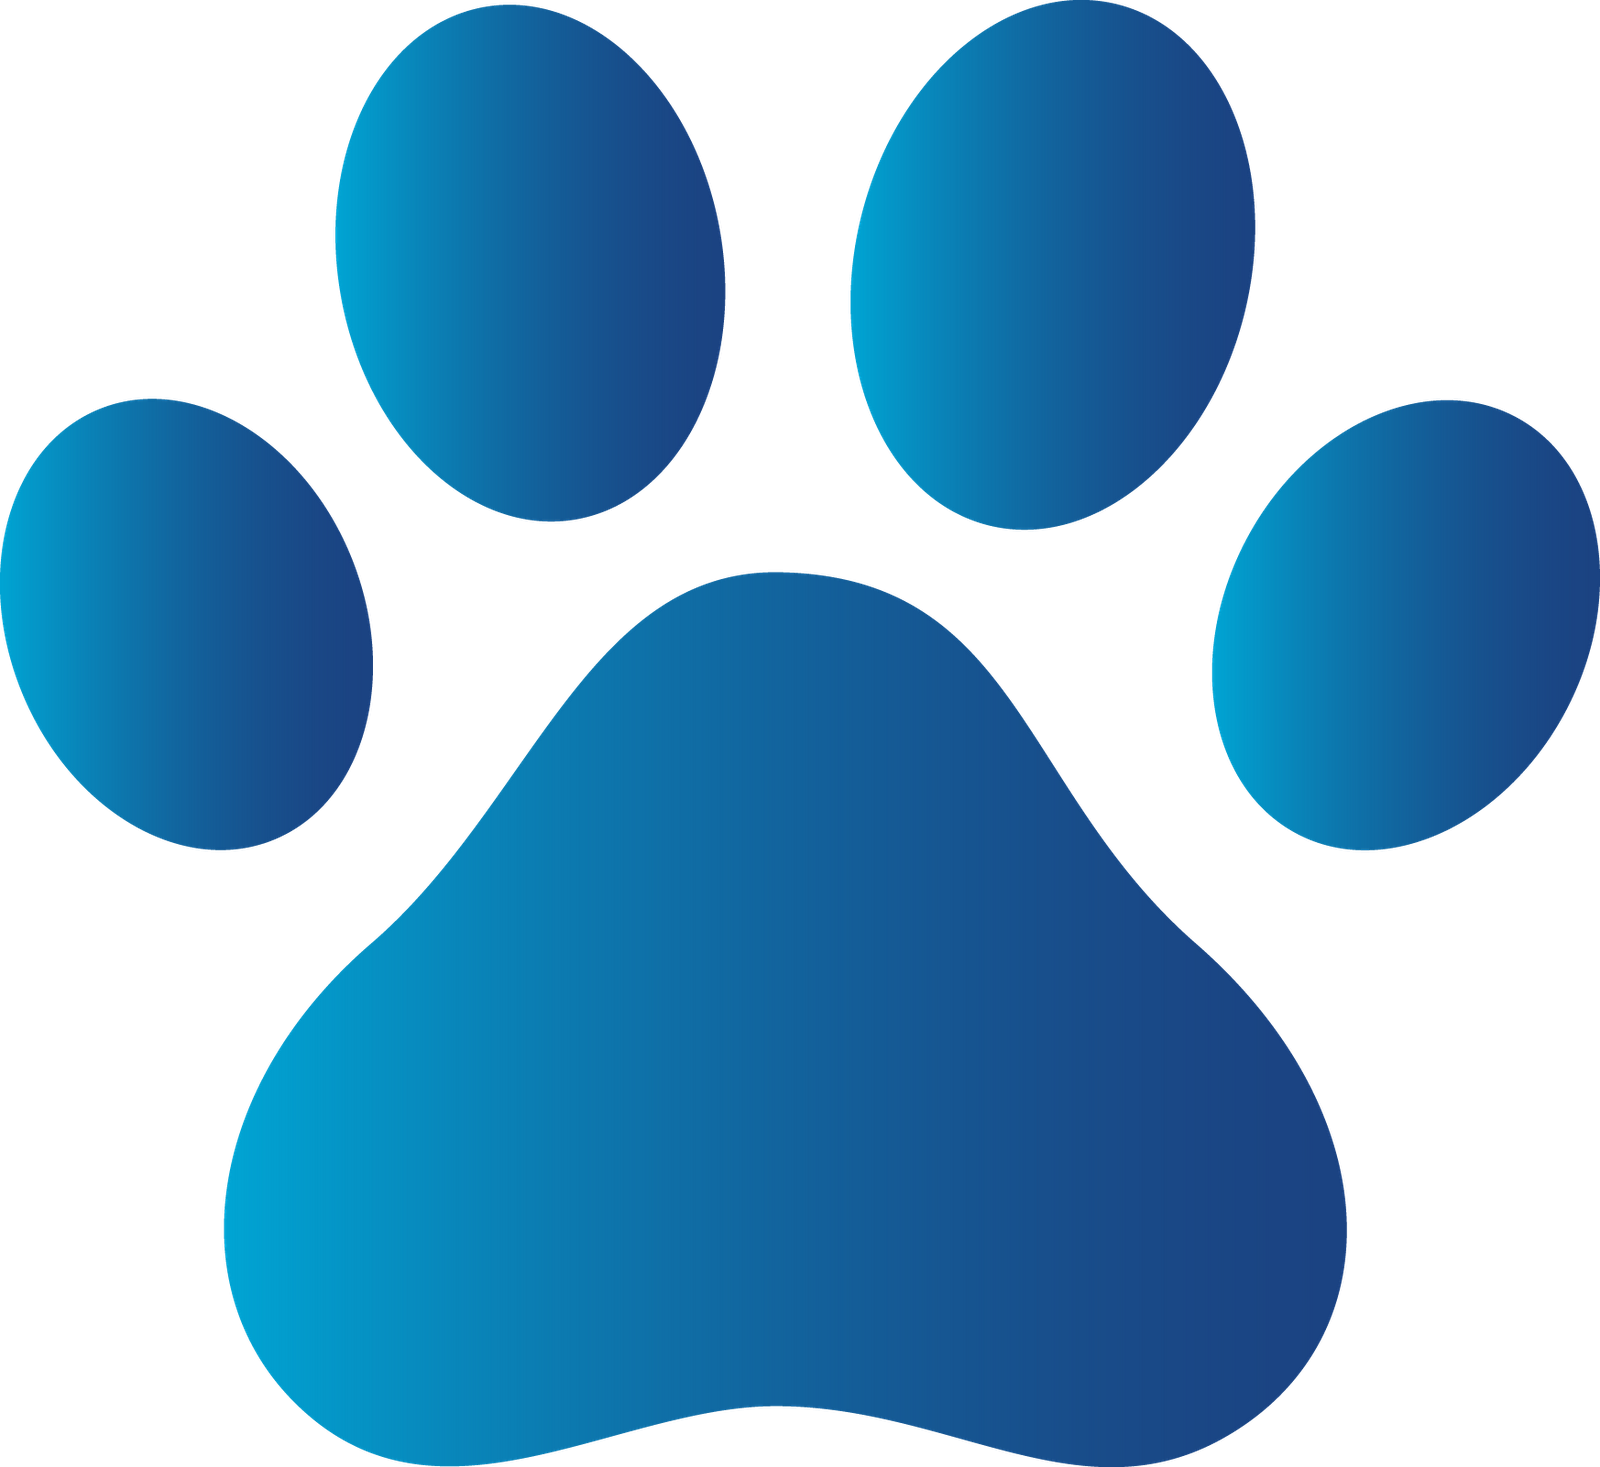 paws clipart ucla